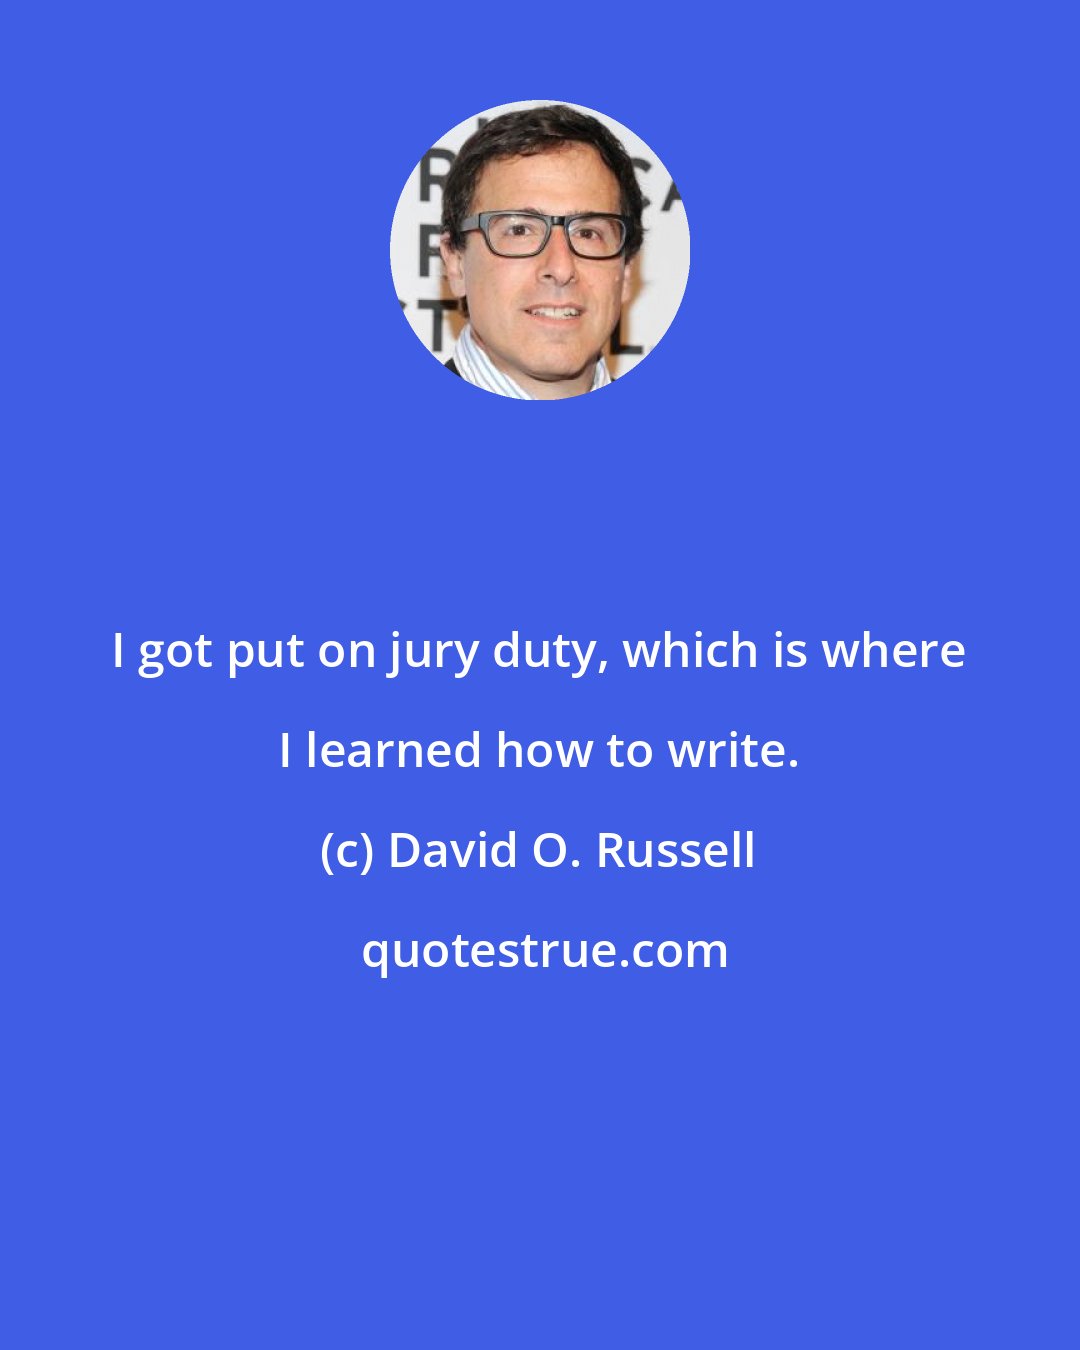 David O. Russell: I got put on jury duty, which is where I learned how to write.